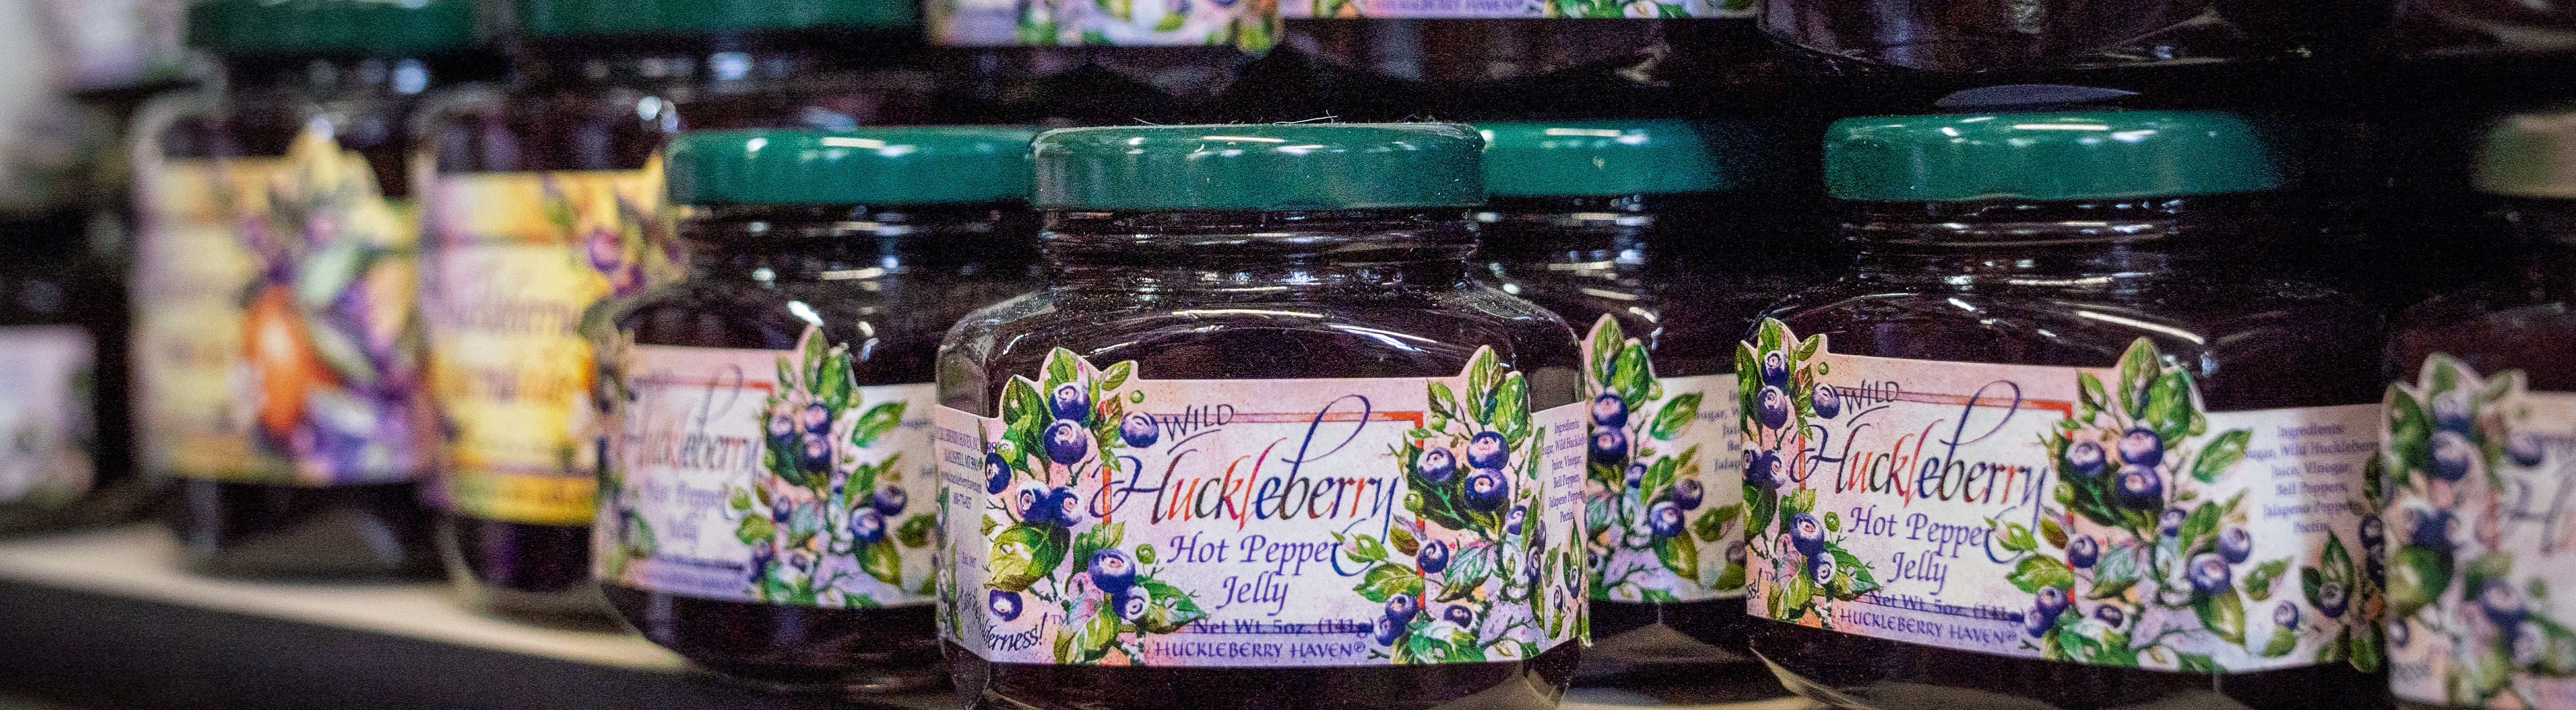 All Things Huckleberry